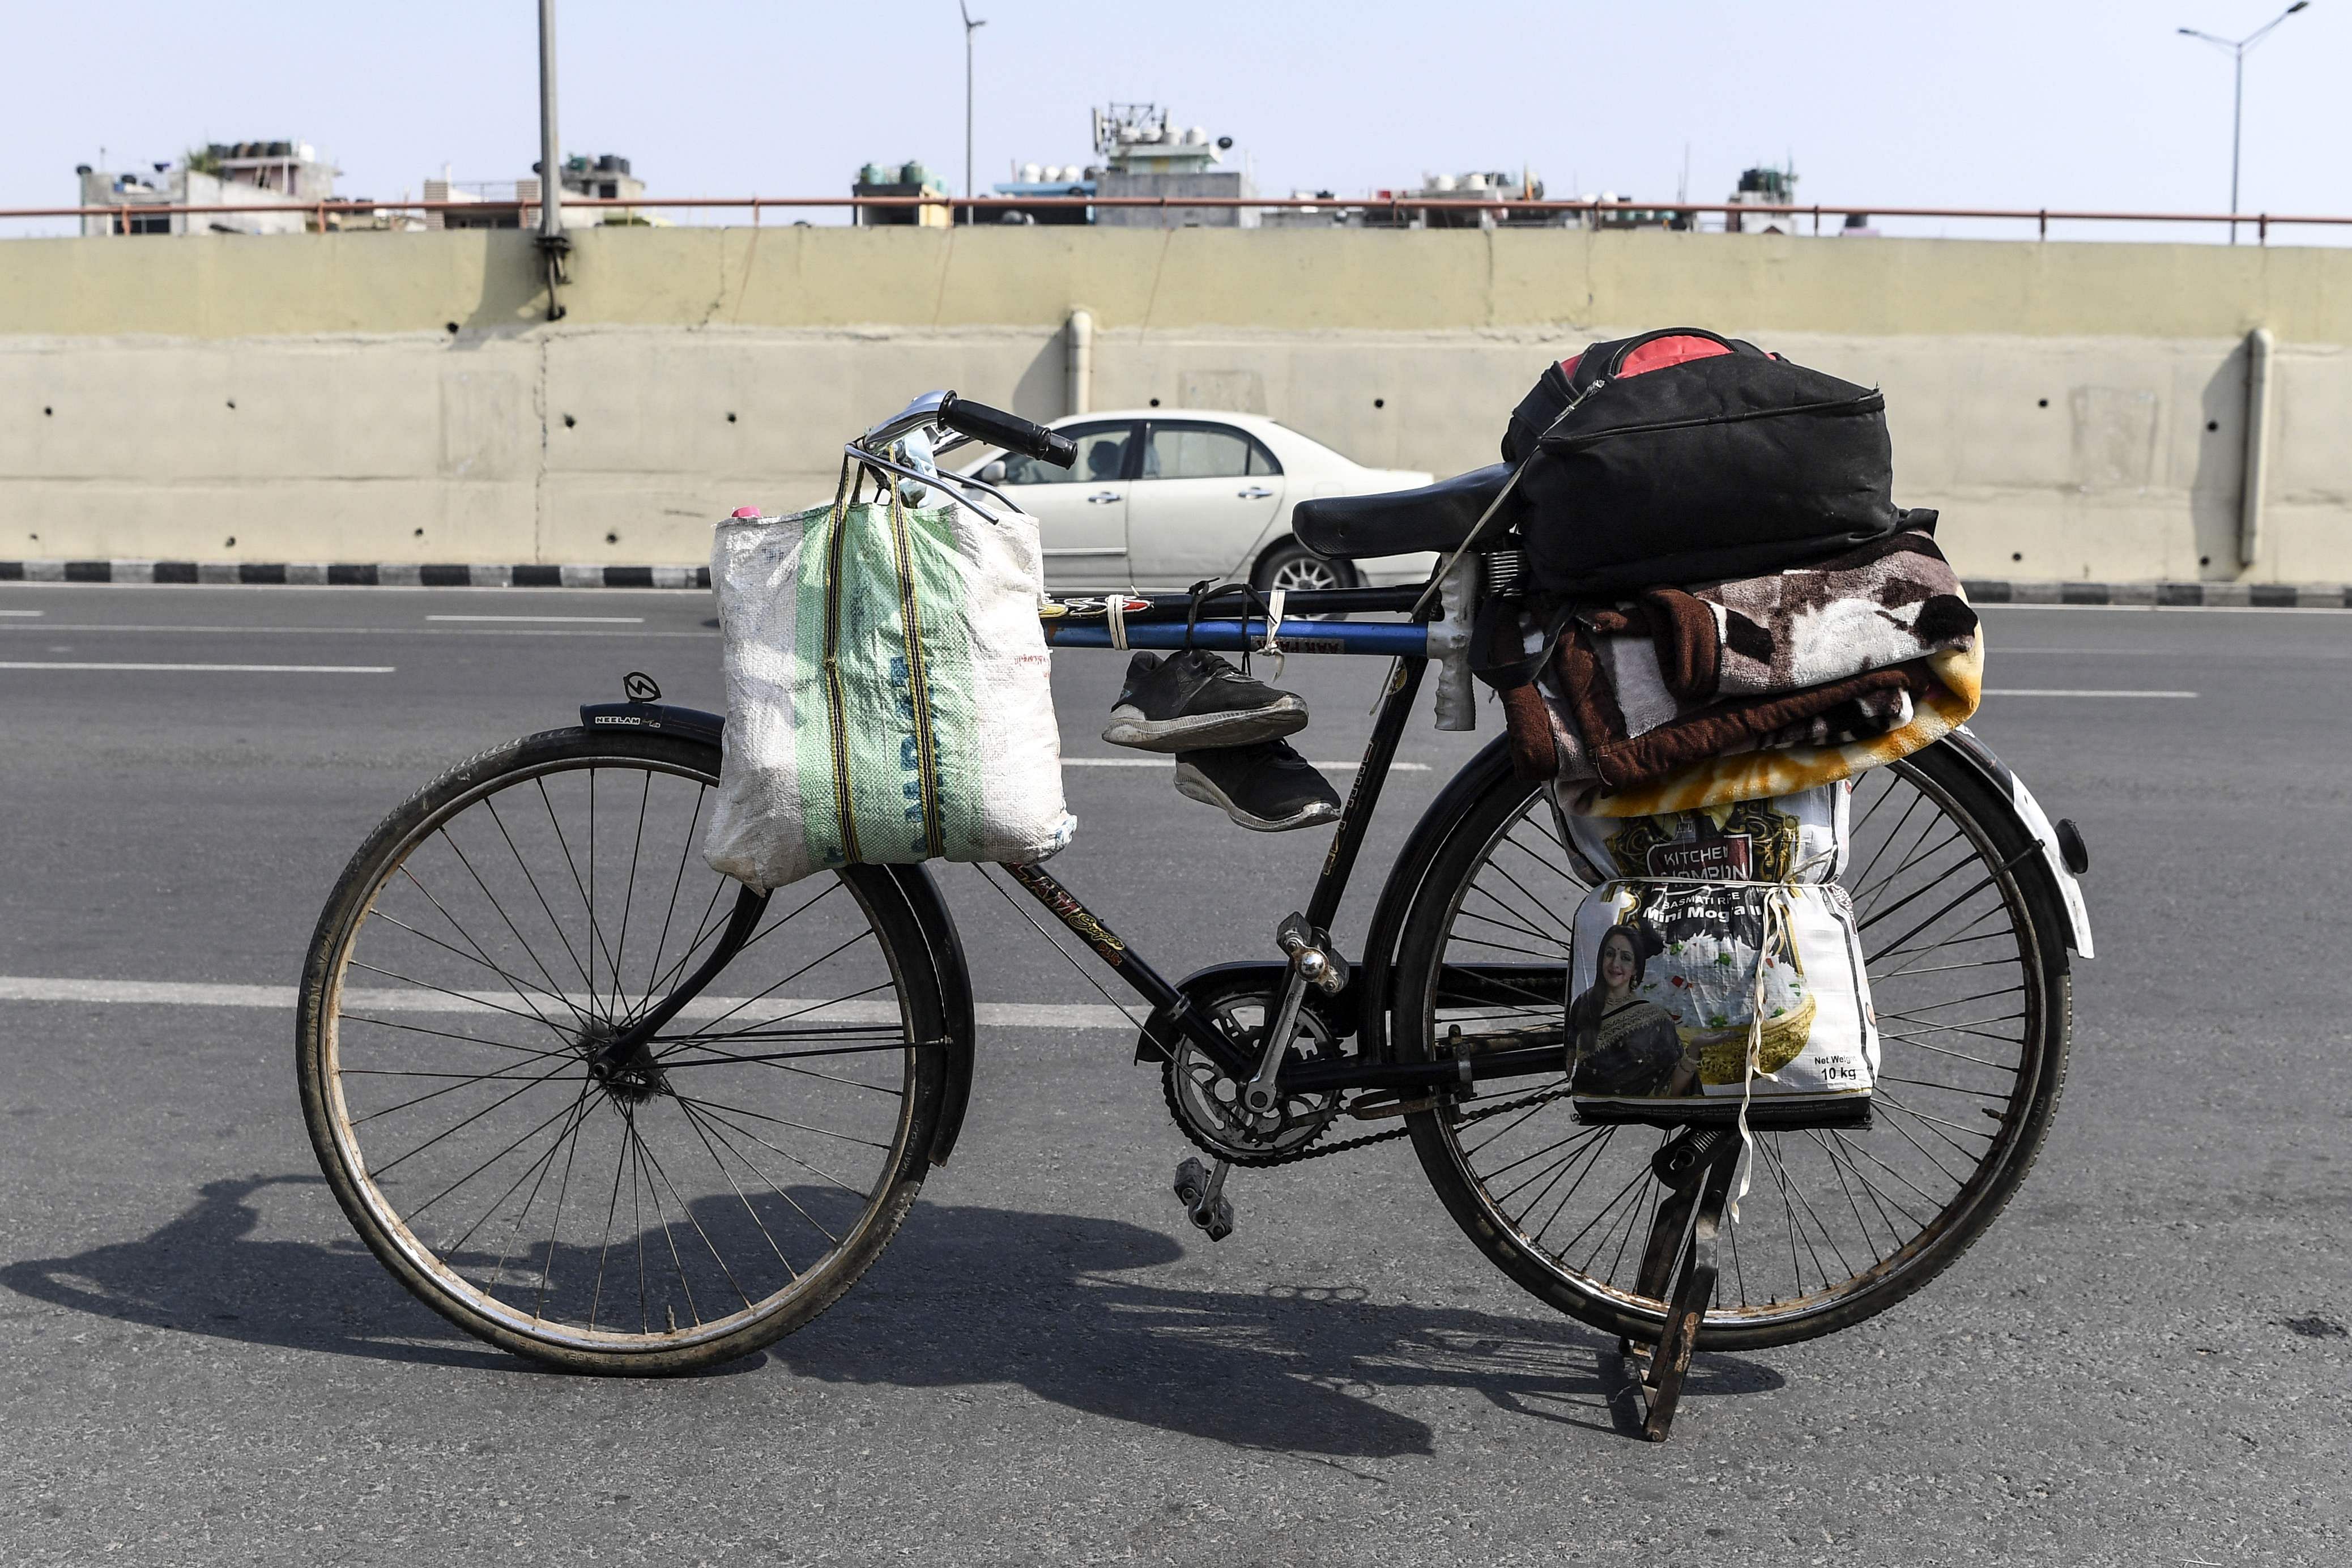 A bicycle of a migrant worker is loaded with belongings at a roadside on the migrant workers' journey back to their hometowns in Uttar Pradesh and Bihar states after the government eased a nationwide lockdown. (AFP photo)